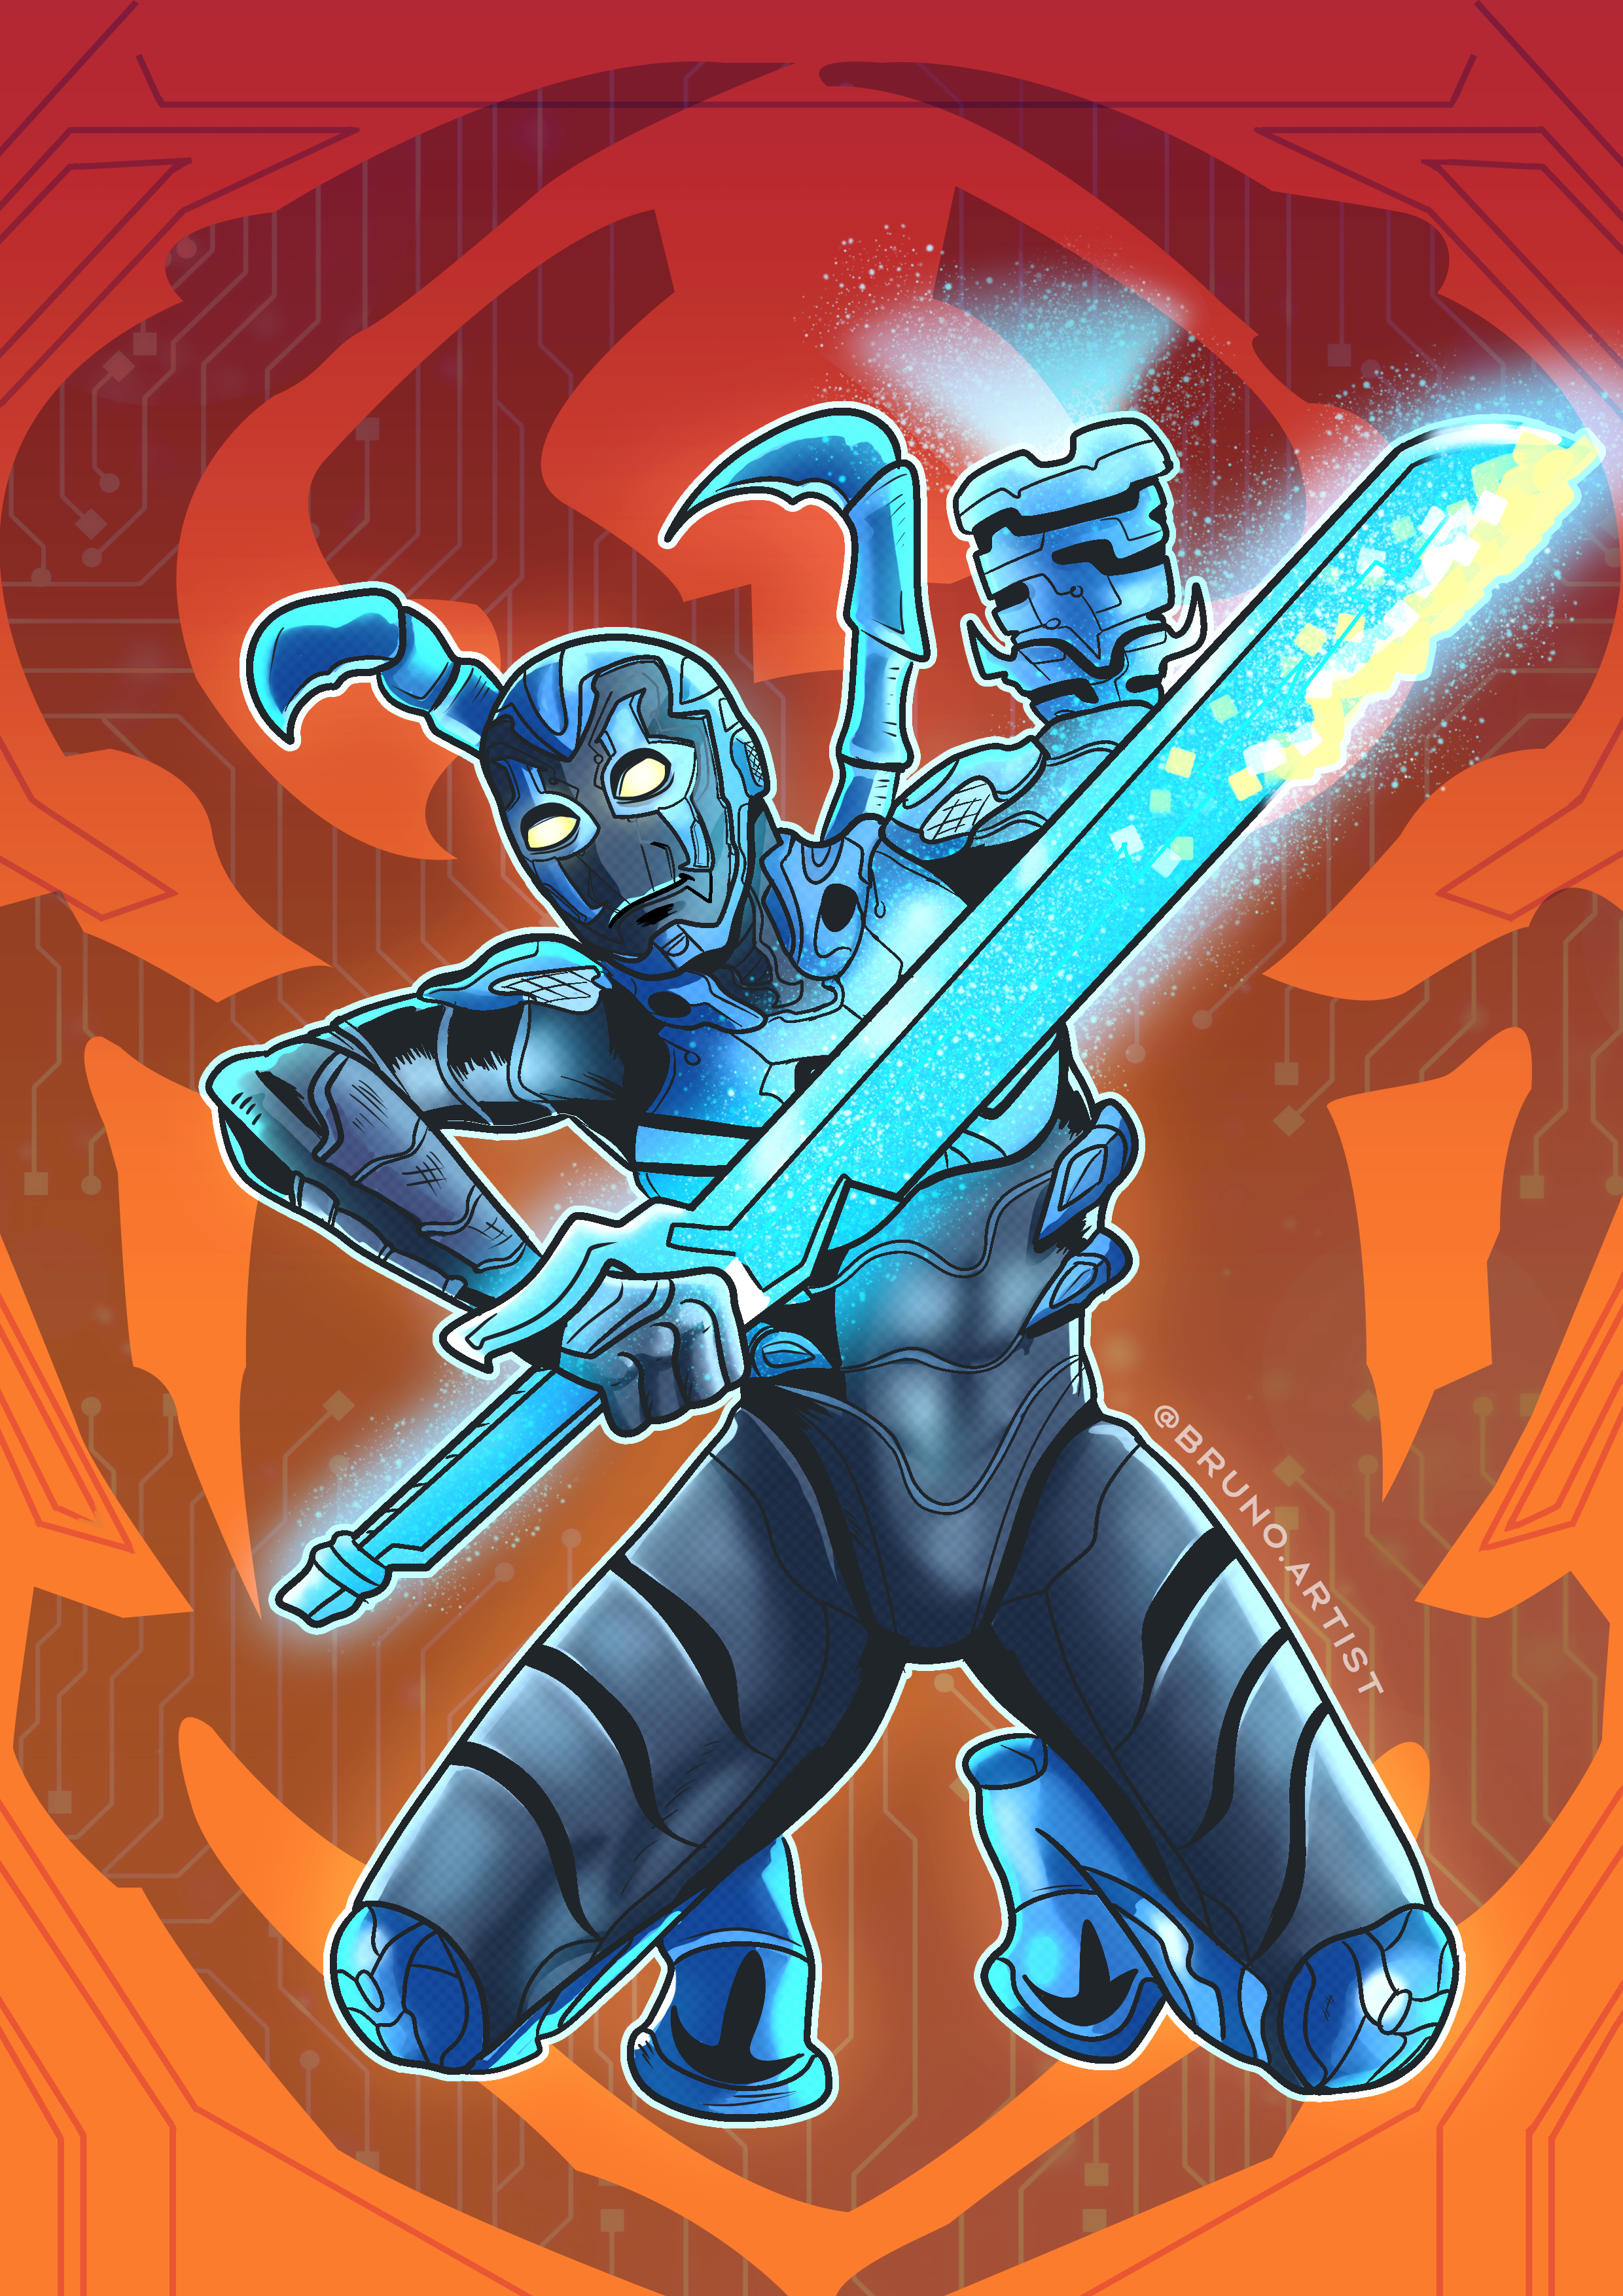 Blue Beetle (2023) by AceCoverDesign on DeviantArt